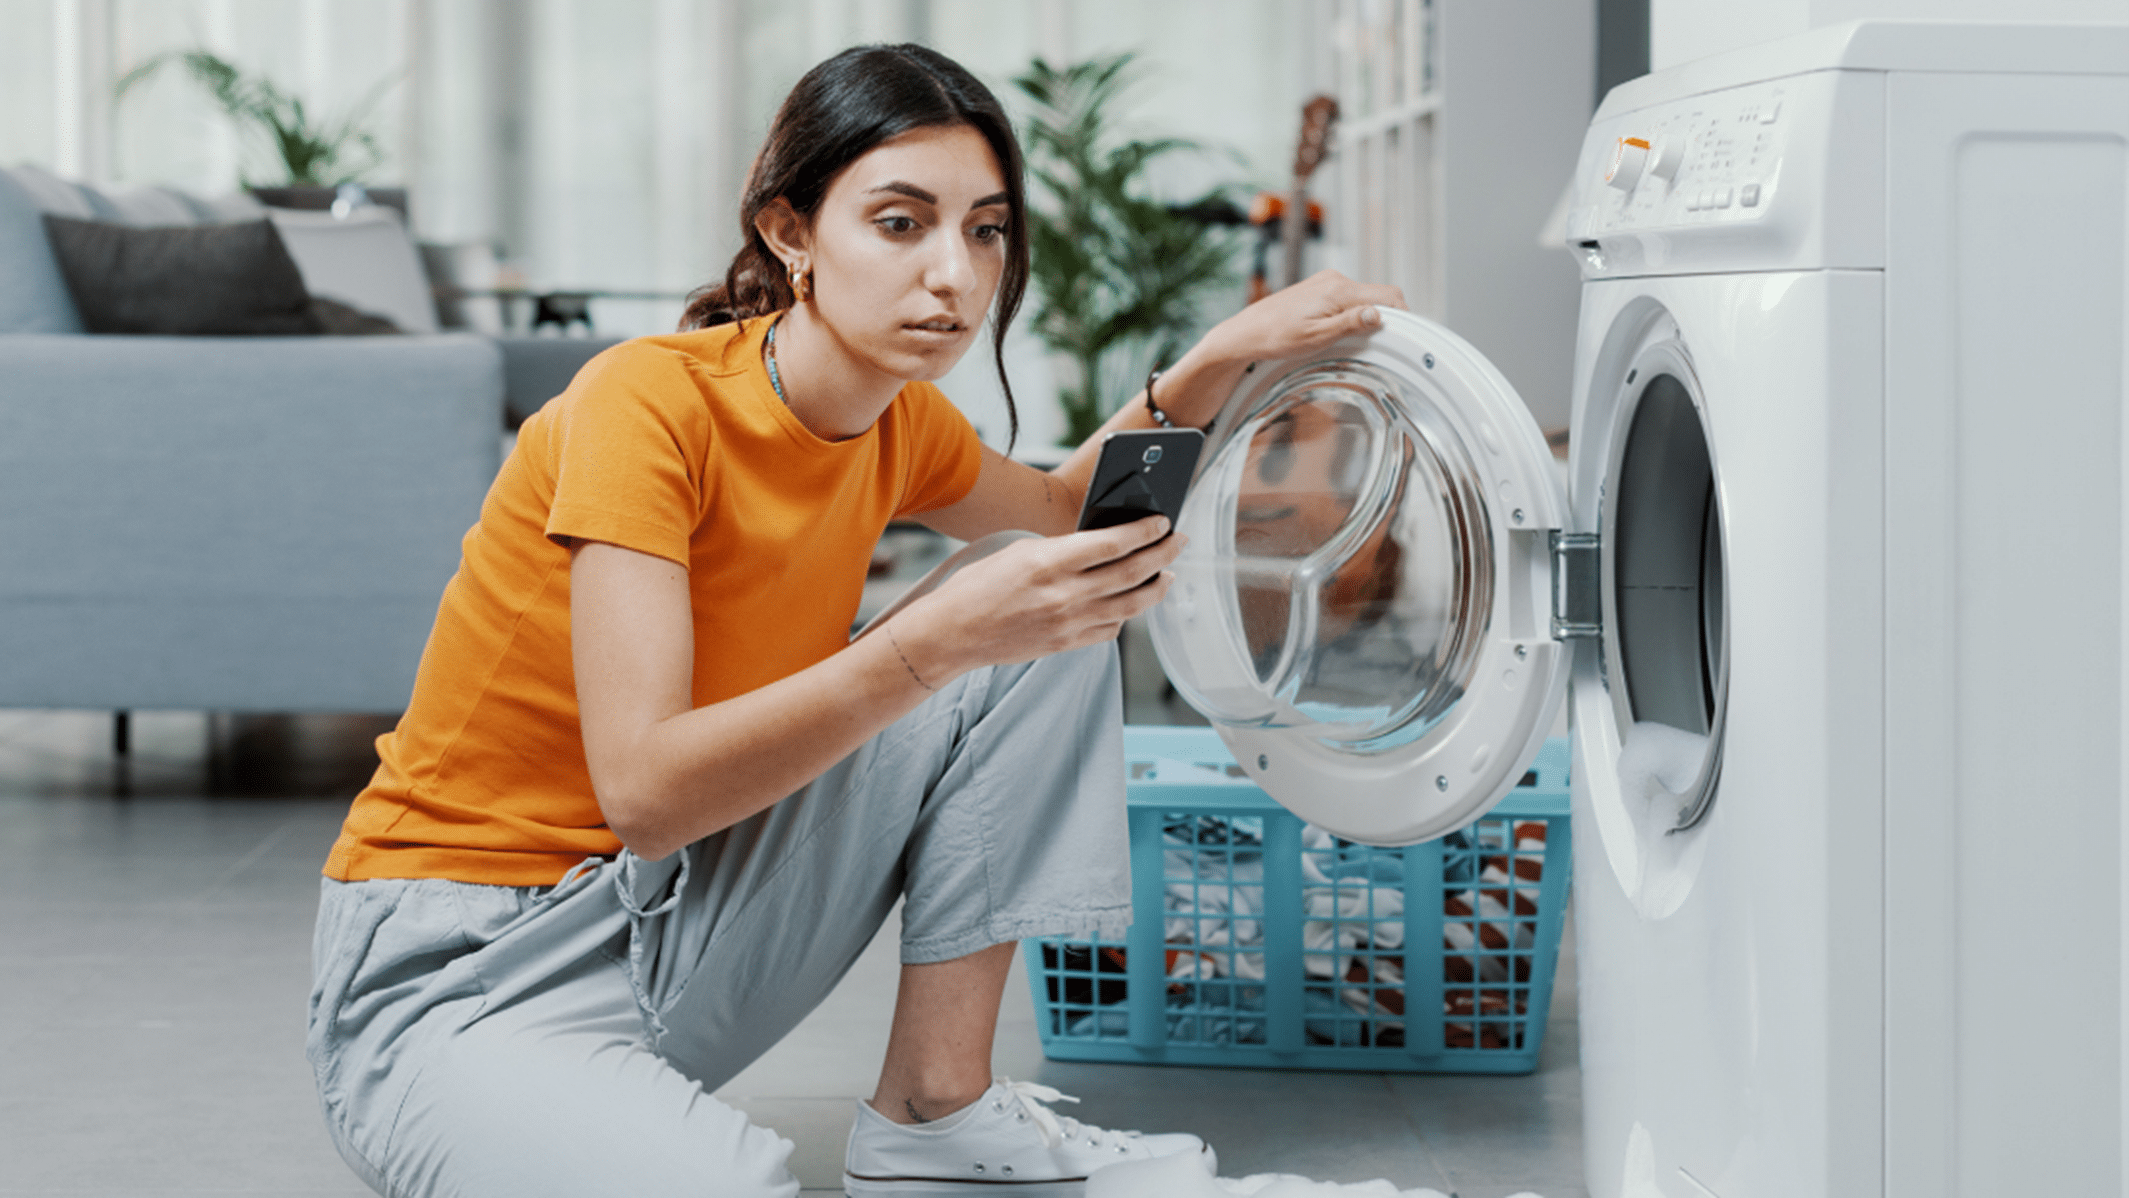 Girl looking on phone while doing laundry